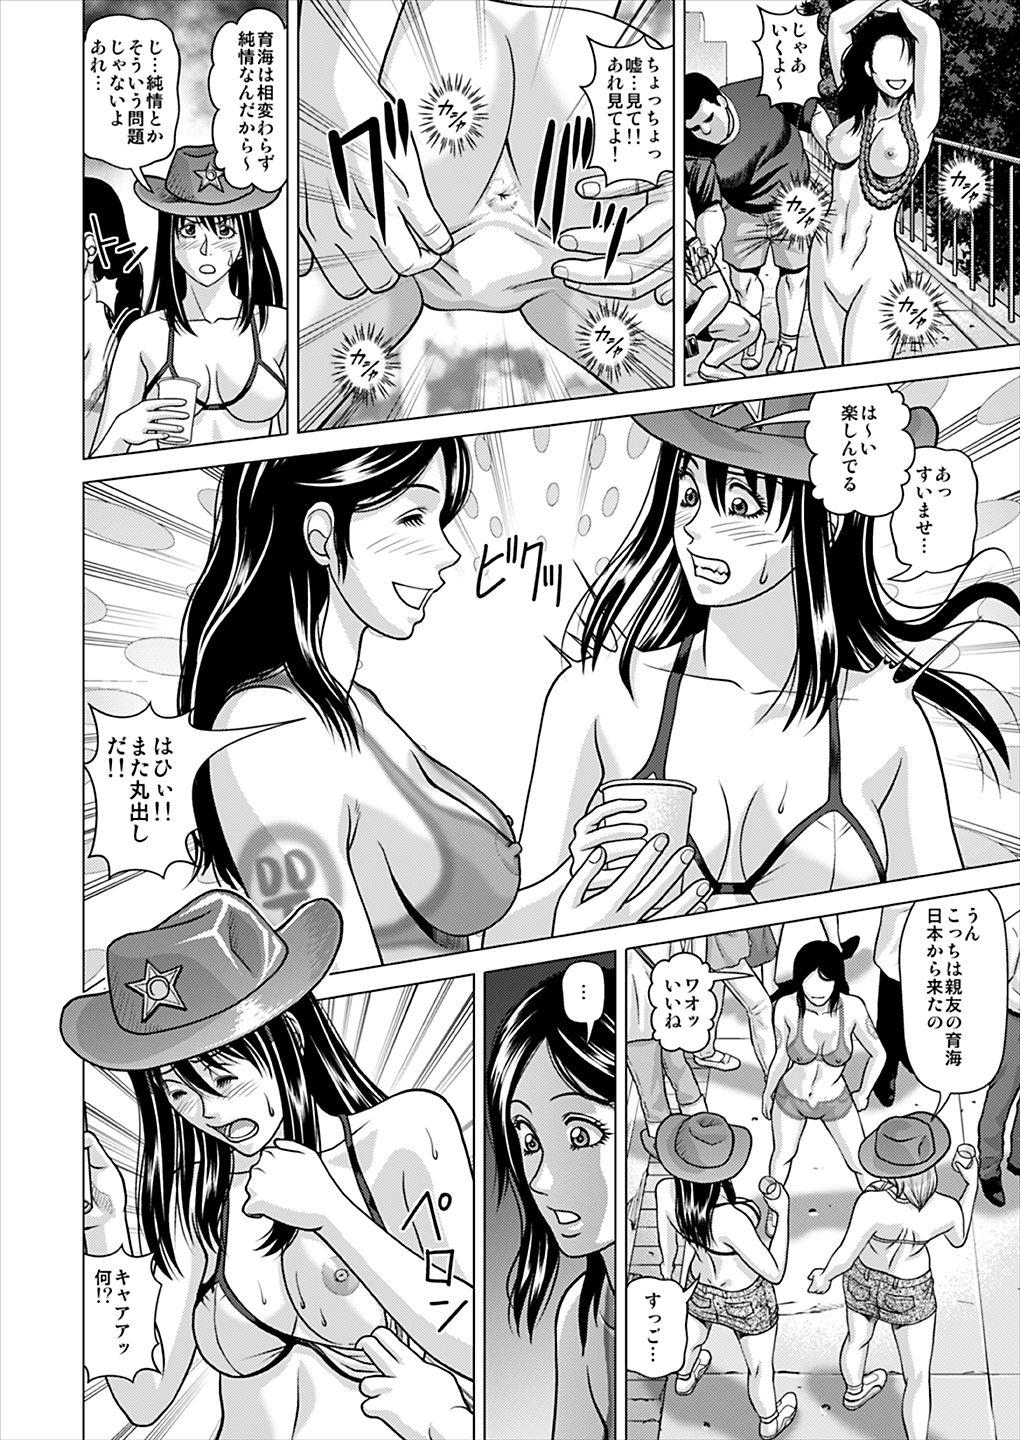 Gemendo I Got Drunk at a Sleazy Festival and Woke Up Post Gang Bang - Original Girls Getting Fucked - Page 7